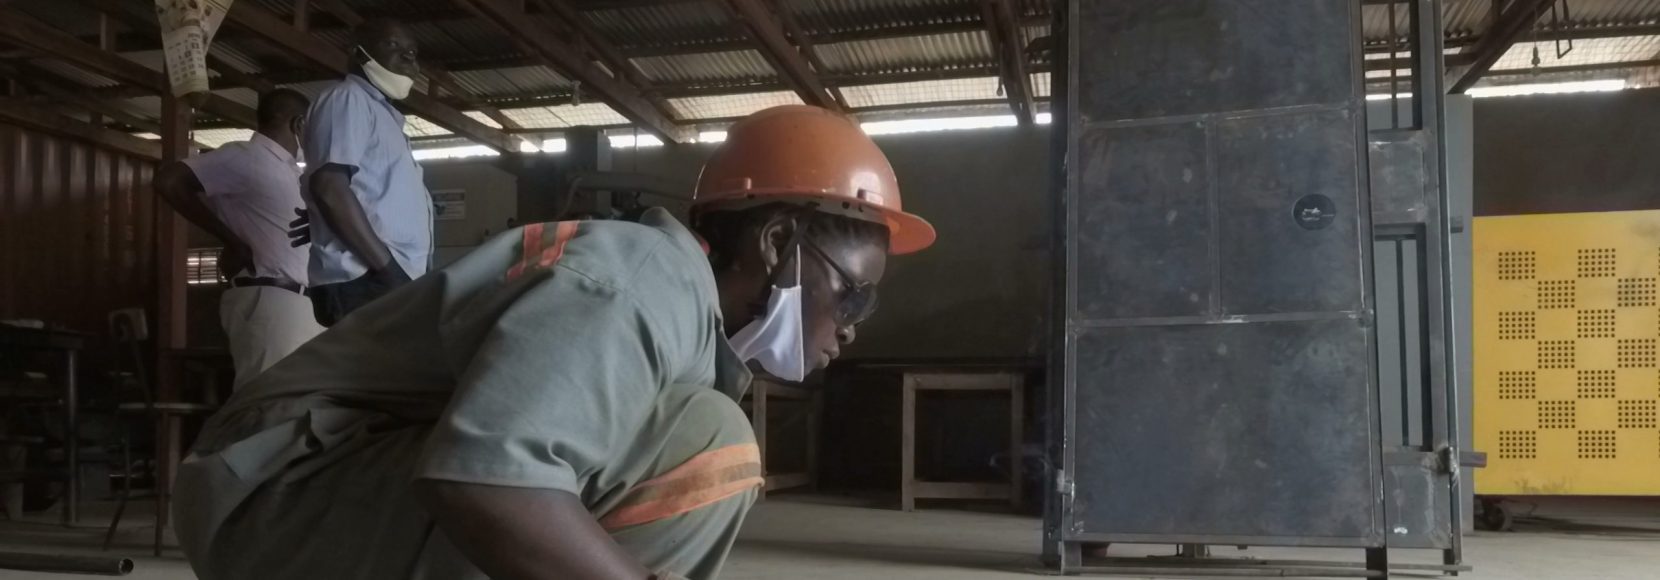 Moureen Nakisozi, a woman excelling in a field often dominated by men, practices her welding skills outside of Kampala, Uganda